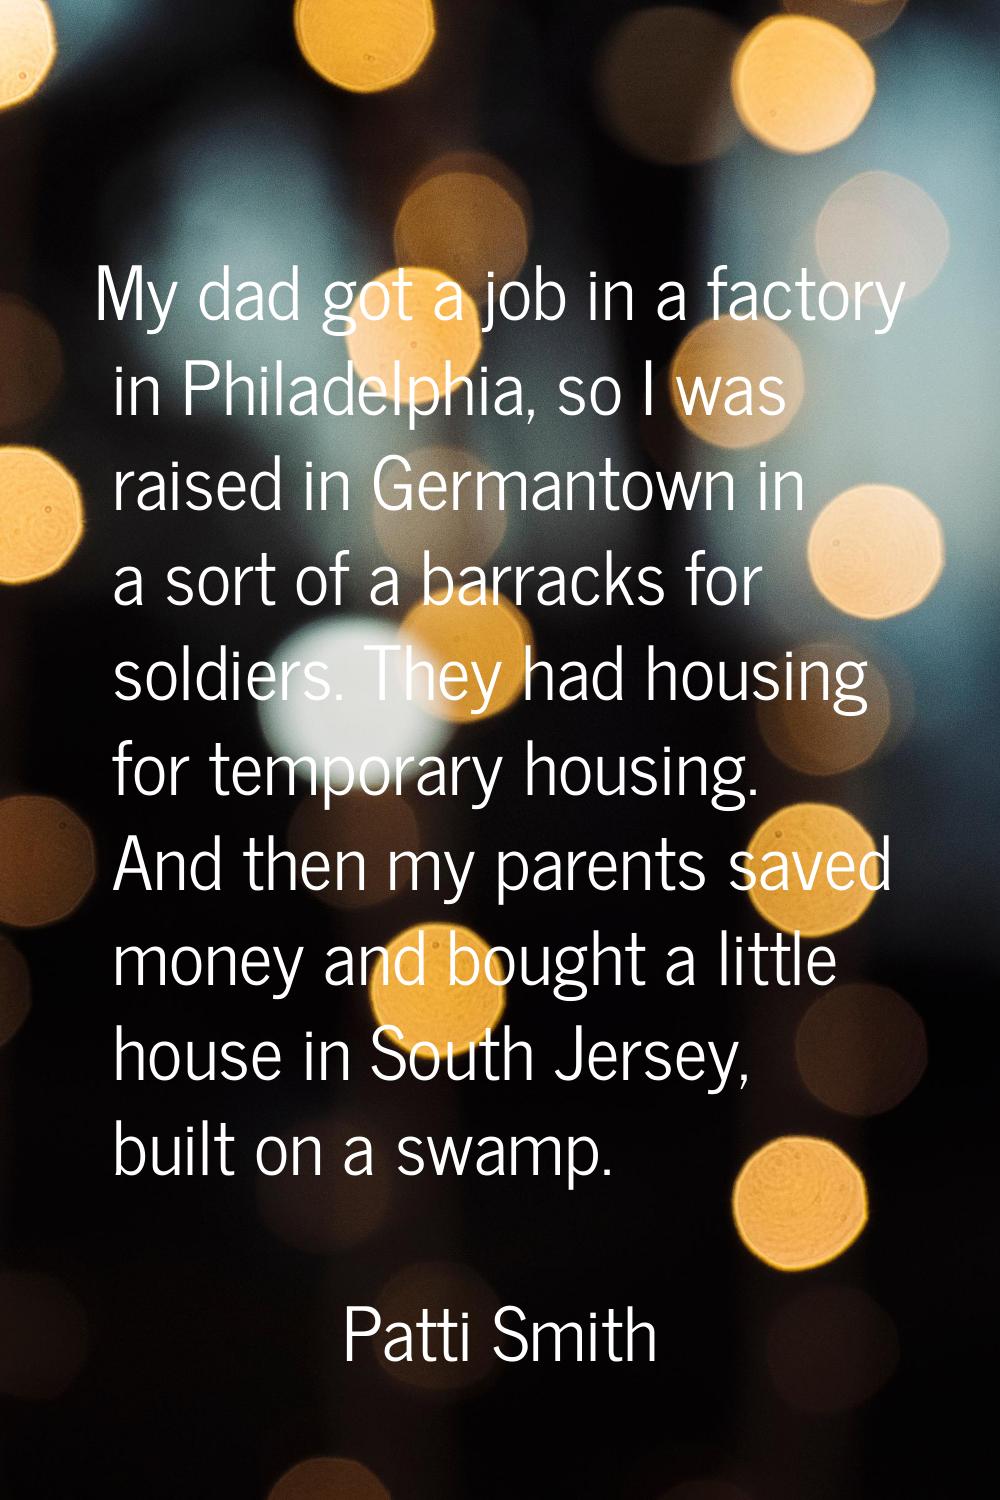 My dad got a job in a factory in Philadelphia, so I was raised in Germantown in a sort of a barrack